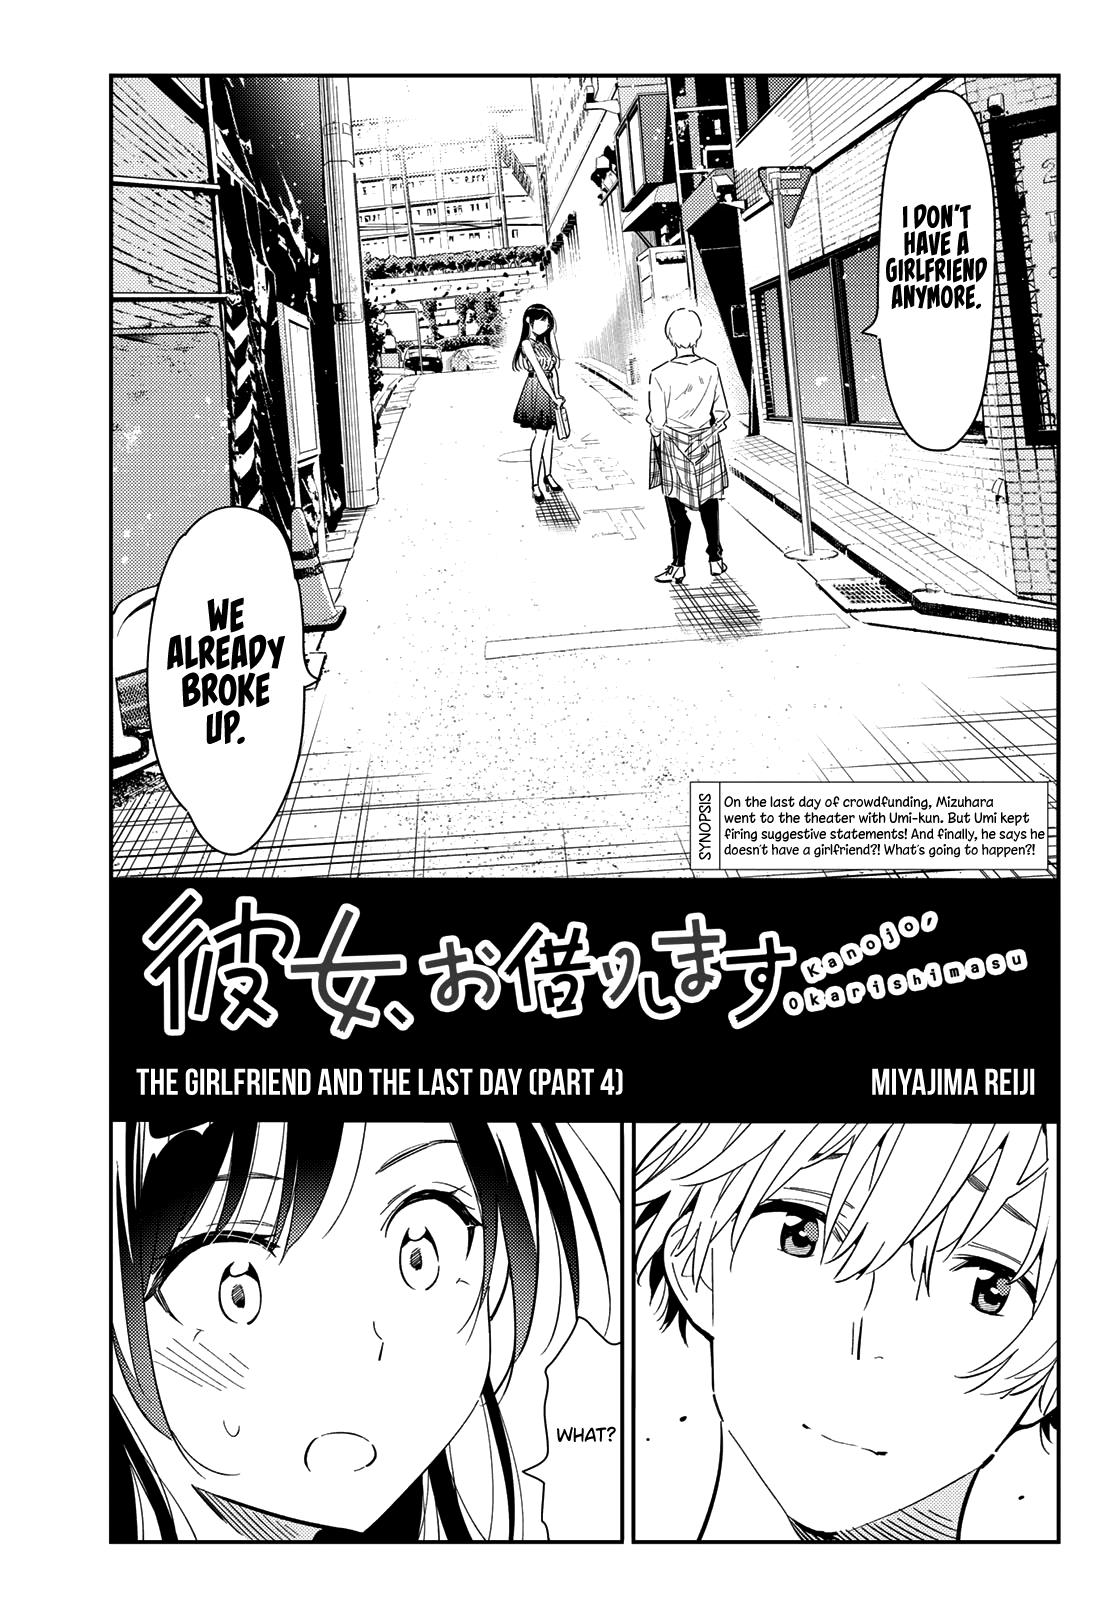 Rent A GirlFriend, Chapter 126 image 001